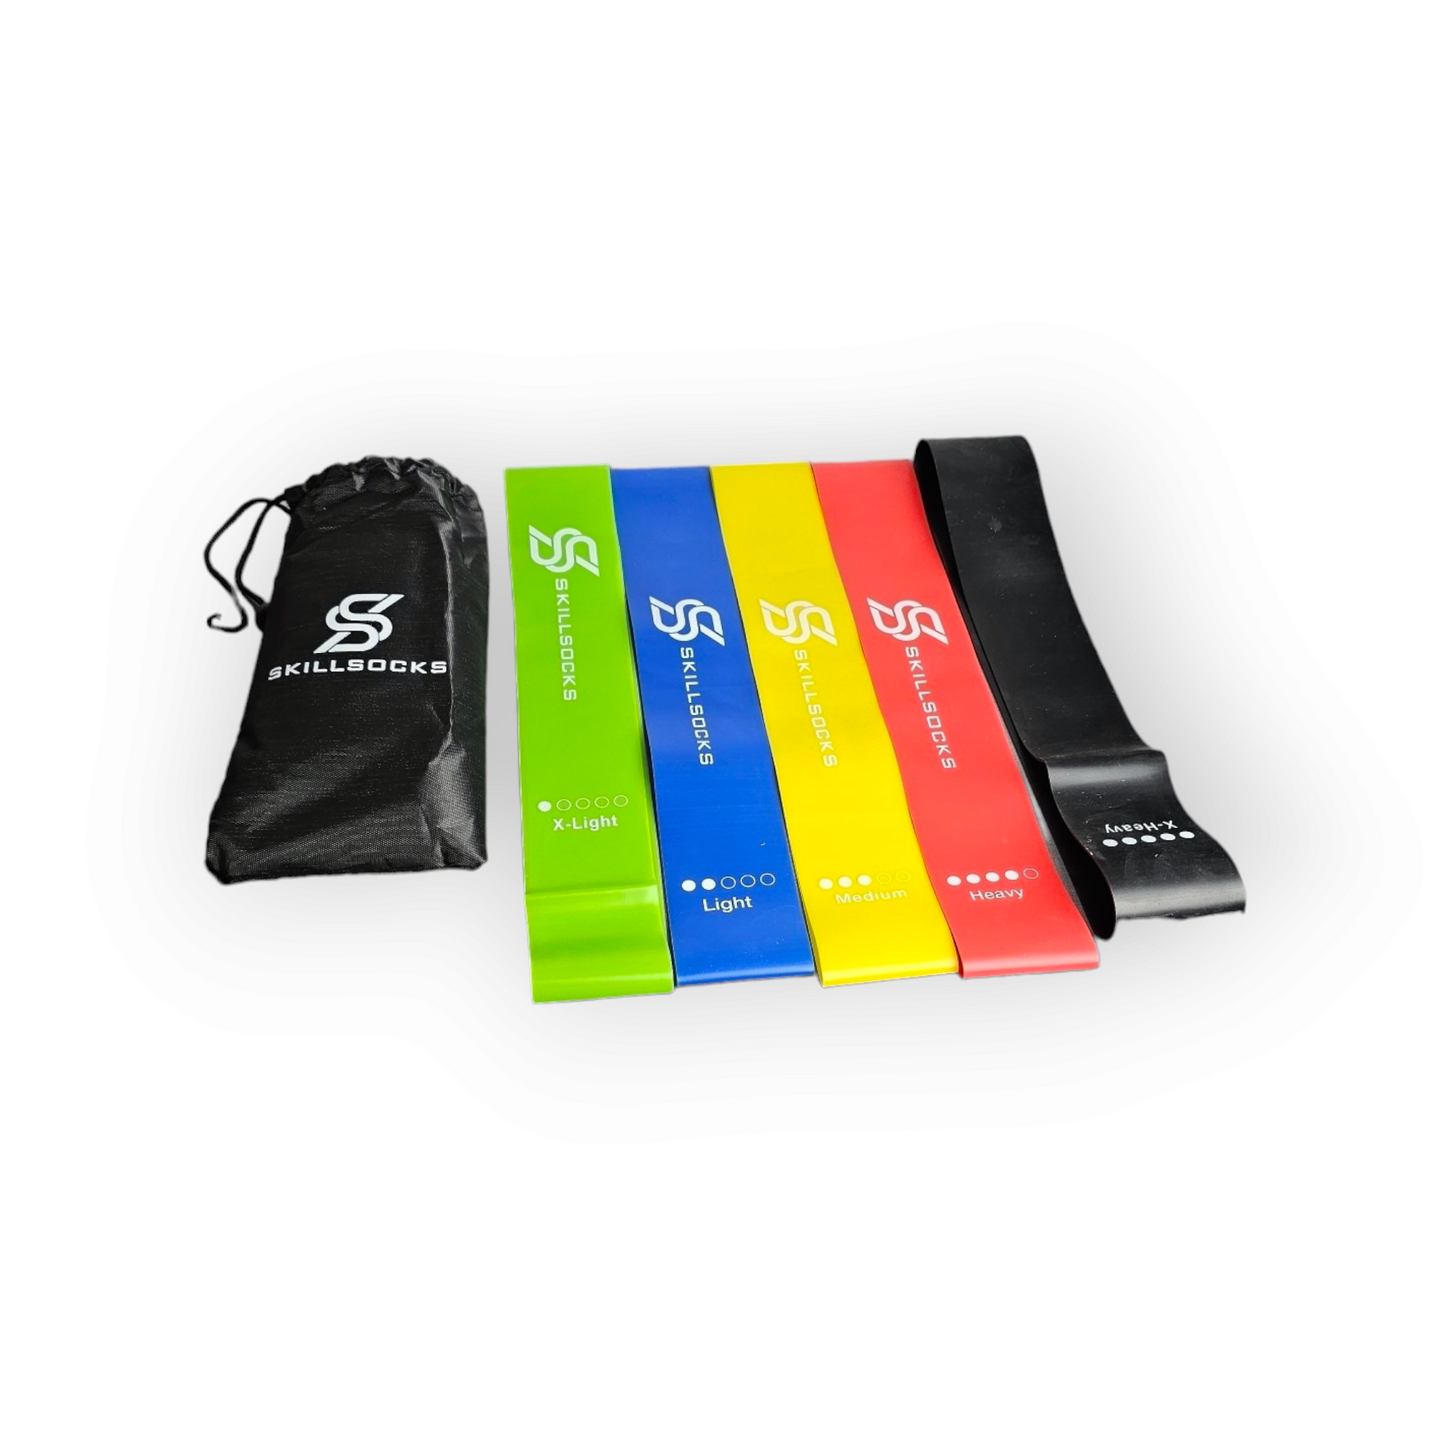 Skillband: Exercise bands - 5 strengths (Five pack)